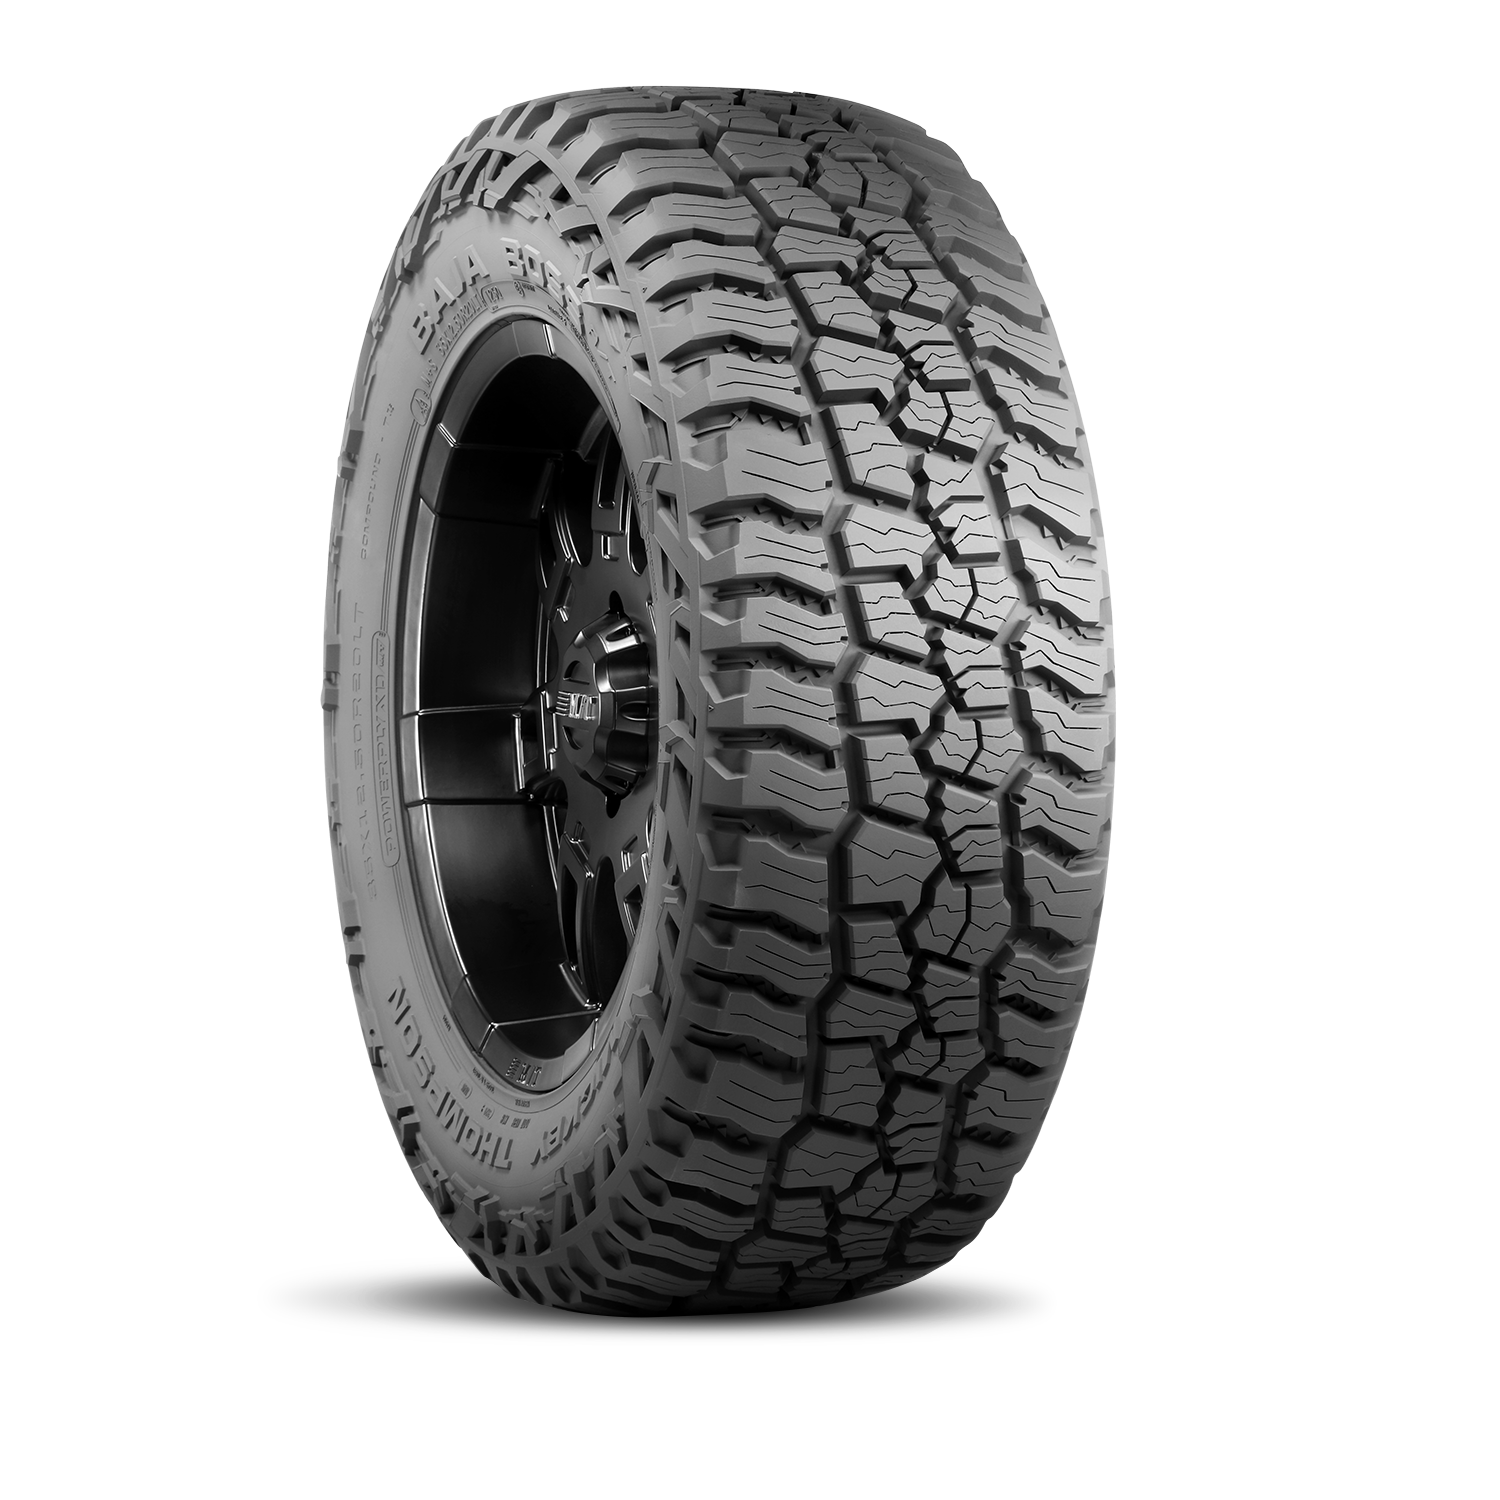 265/70R16 112T MICKEY THOMPSON BAJA BOSS AT ALL-WEATHER TIRES (M+S + SNOWFLAKE)